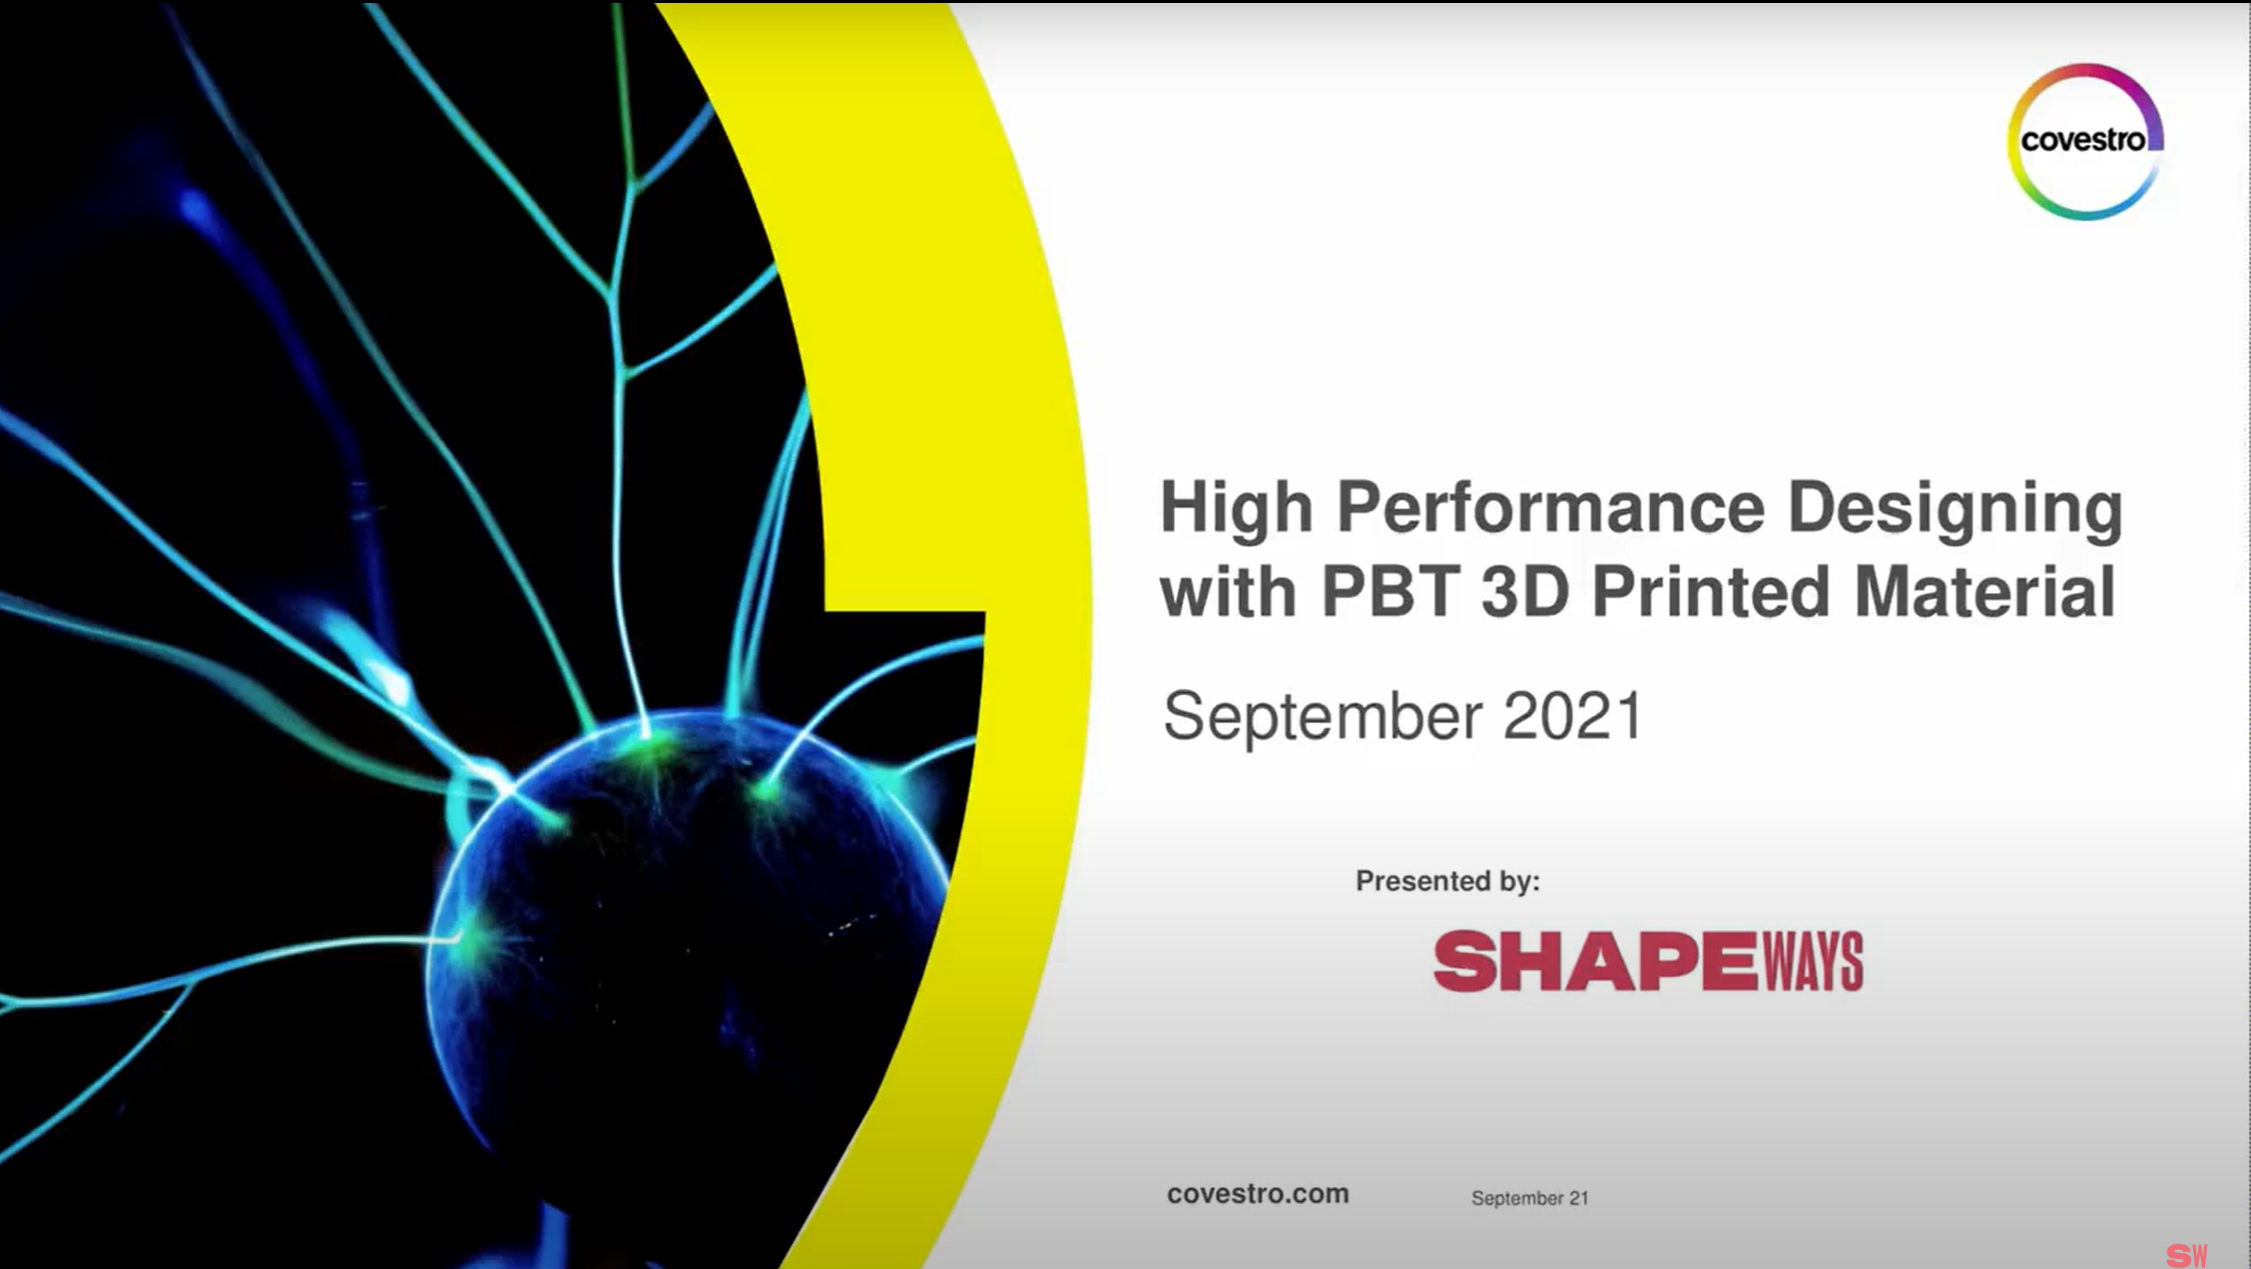 High Performance Designing with PBT 3D Printed Material